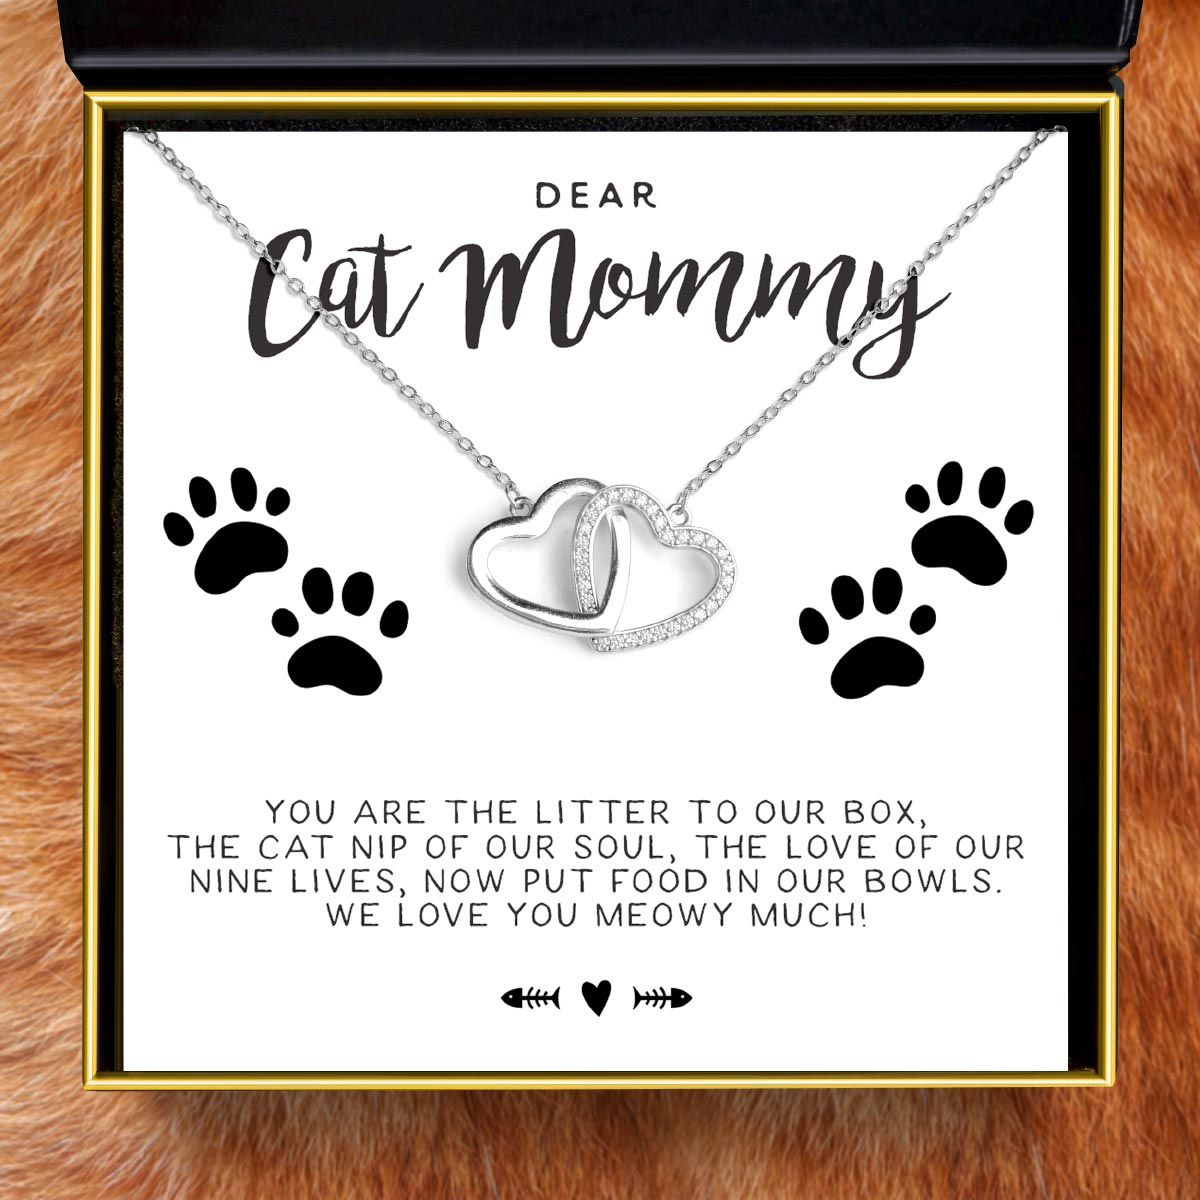 To My Cat Mommy - Sterling Silver Joined Hearts Necklace Gift Set